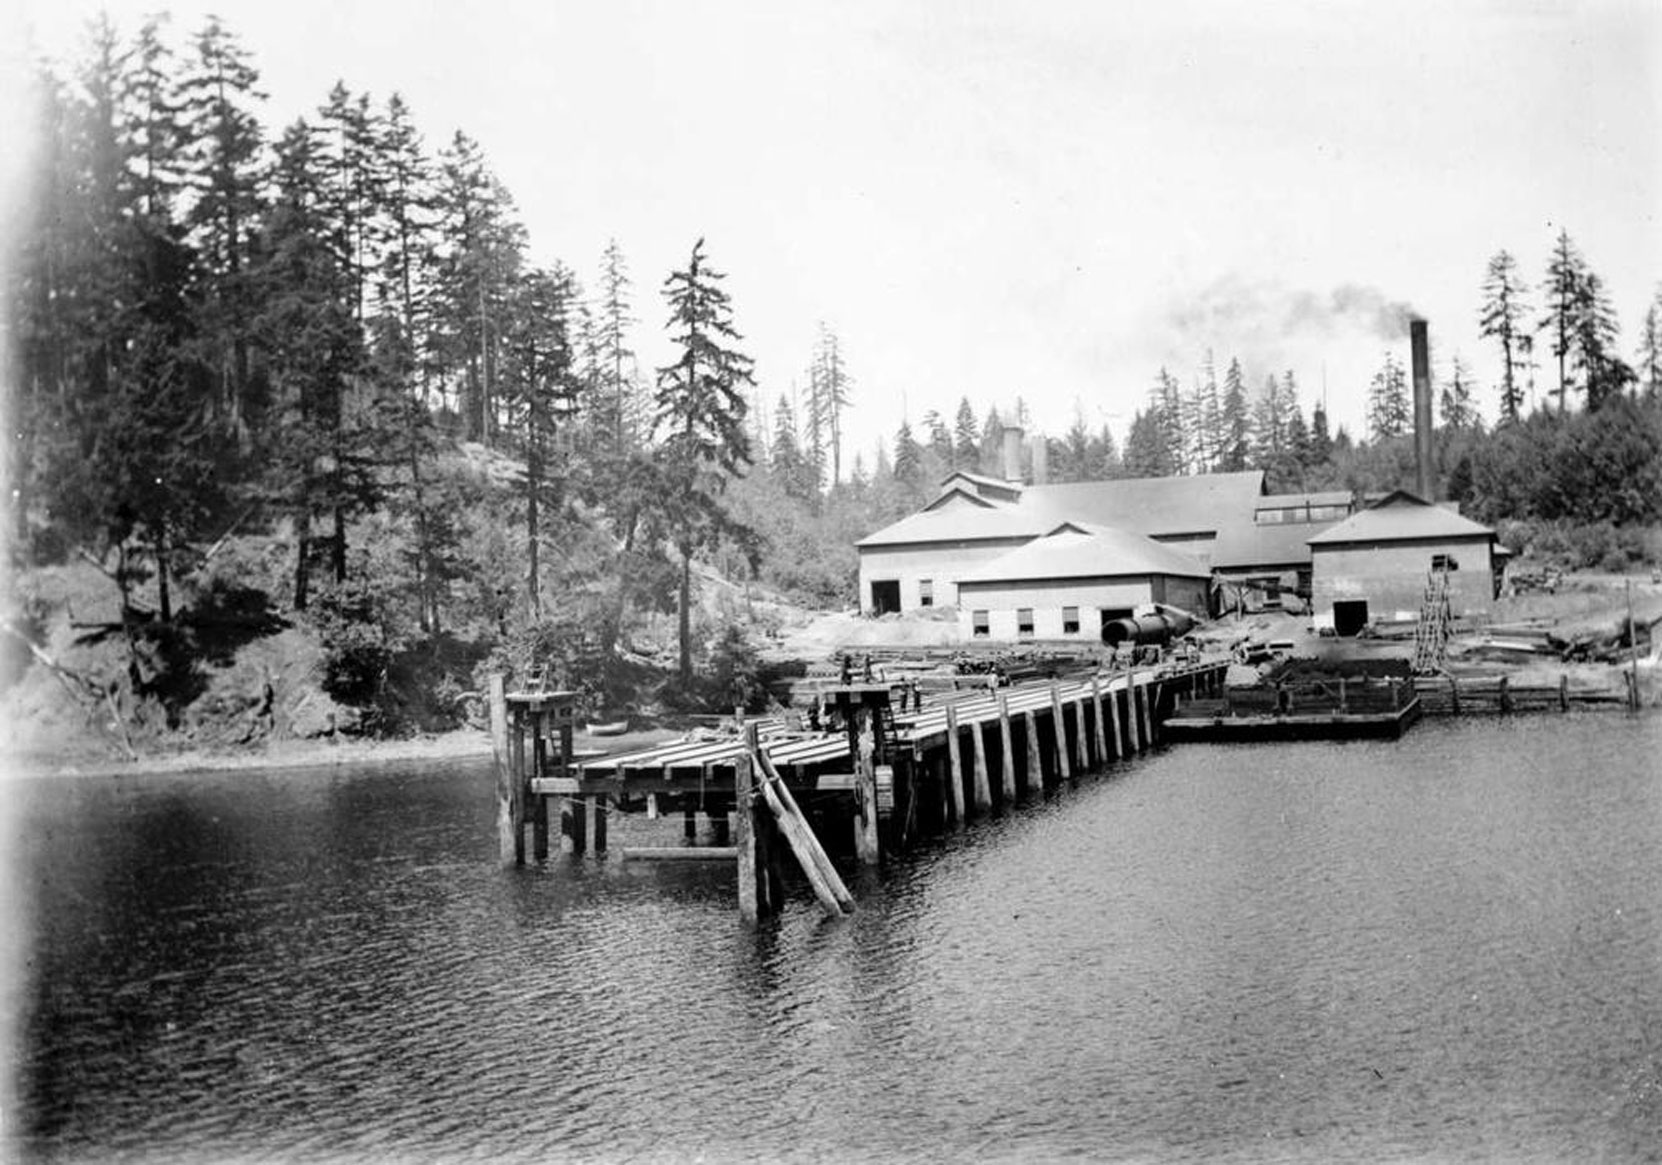 The Vancouver Portland Cement Company plant at Tod Inlet, circa 1904 (BC Archives photo G-08188)